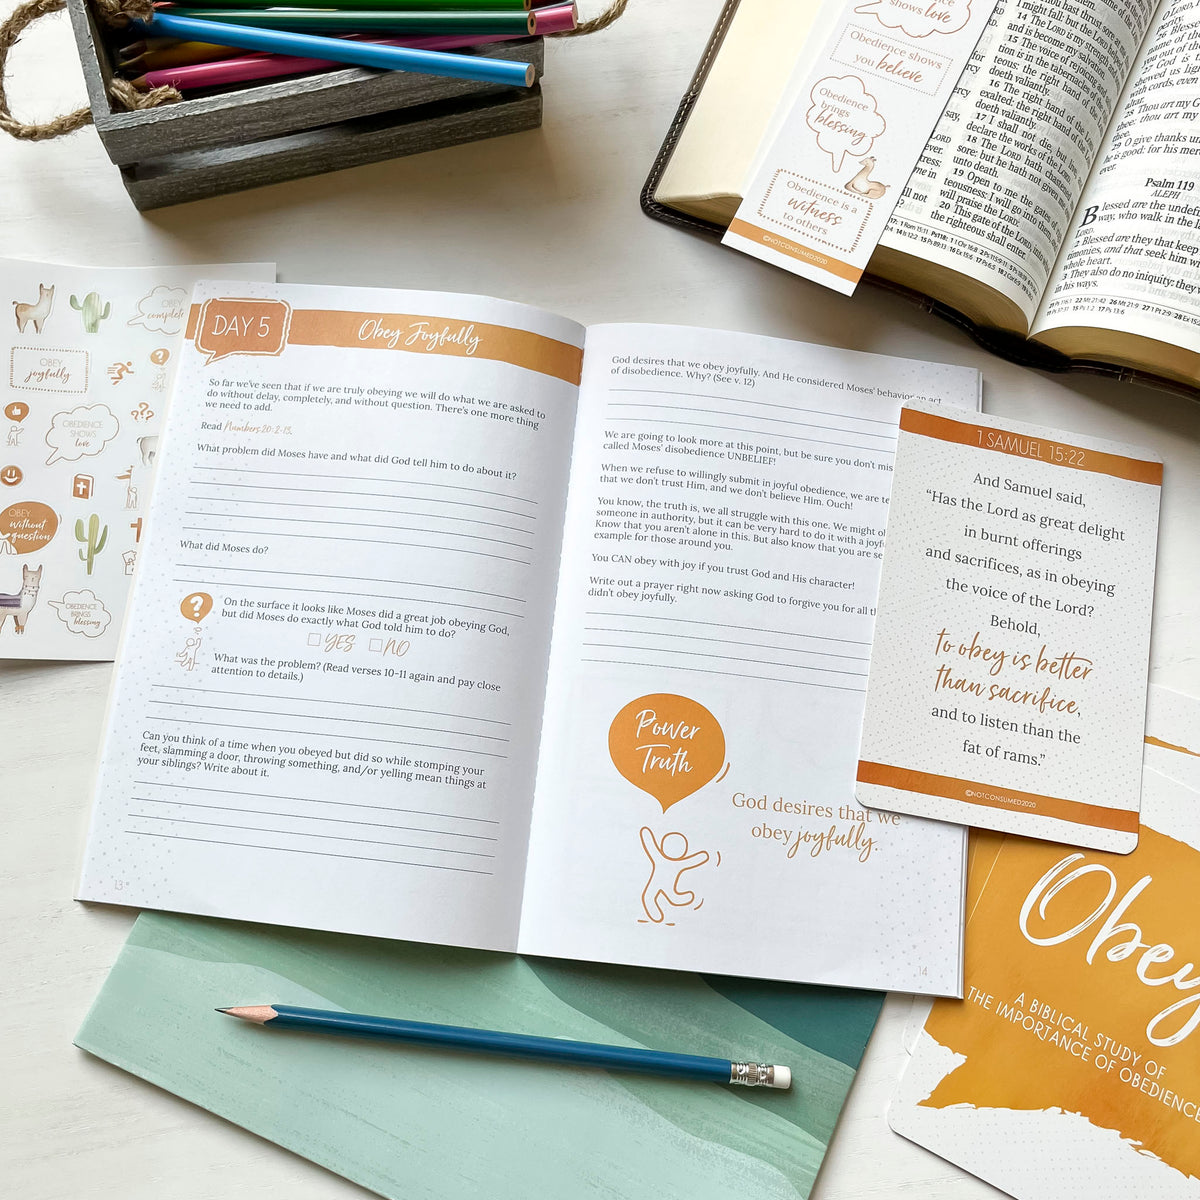 Obey Bible Study for Kids - Clearance